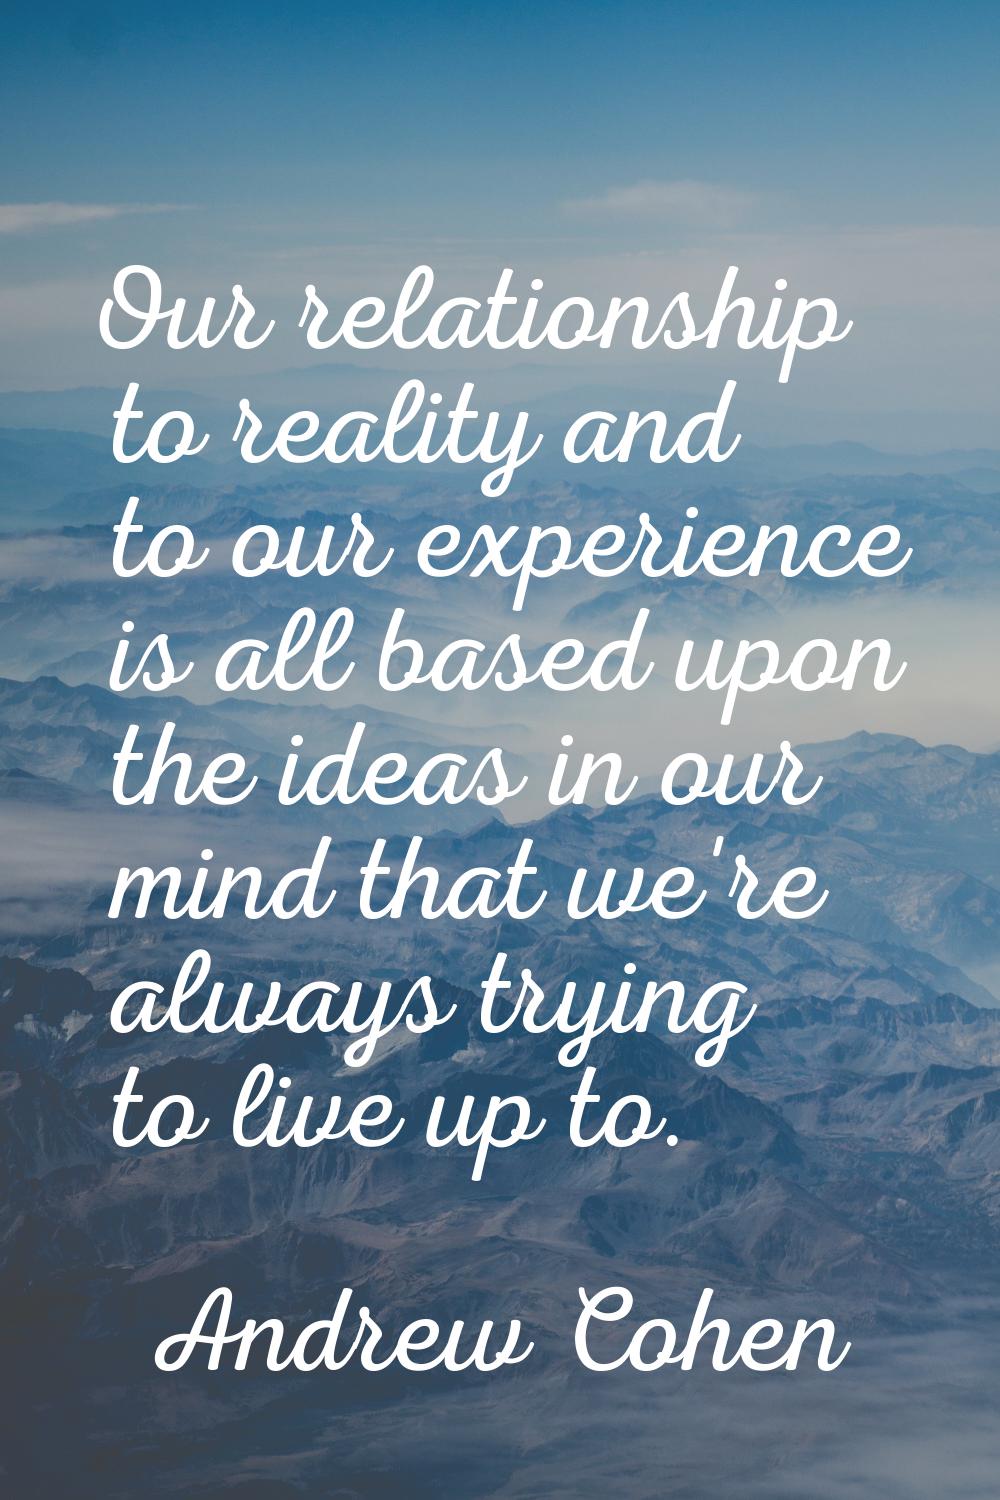 Our relationship to reality and to our experience is all based upon the ideas in our mind that we'r